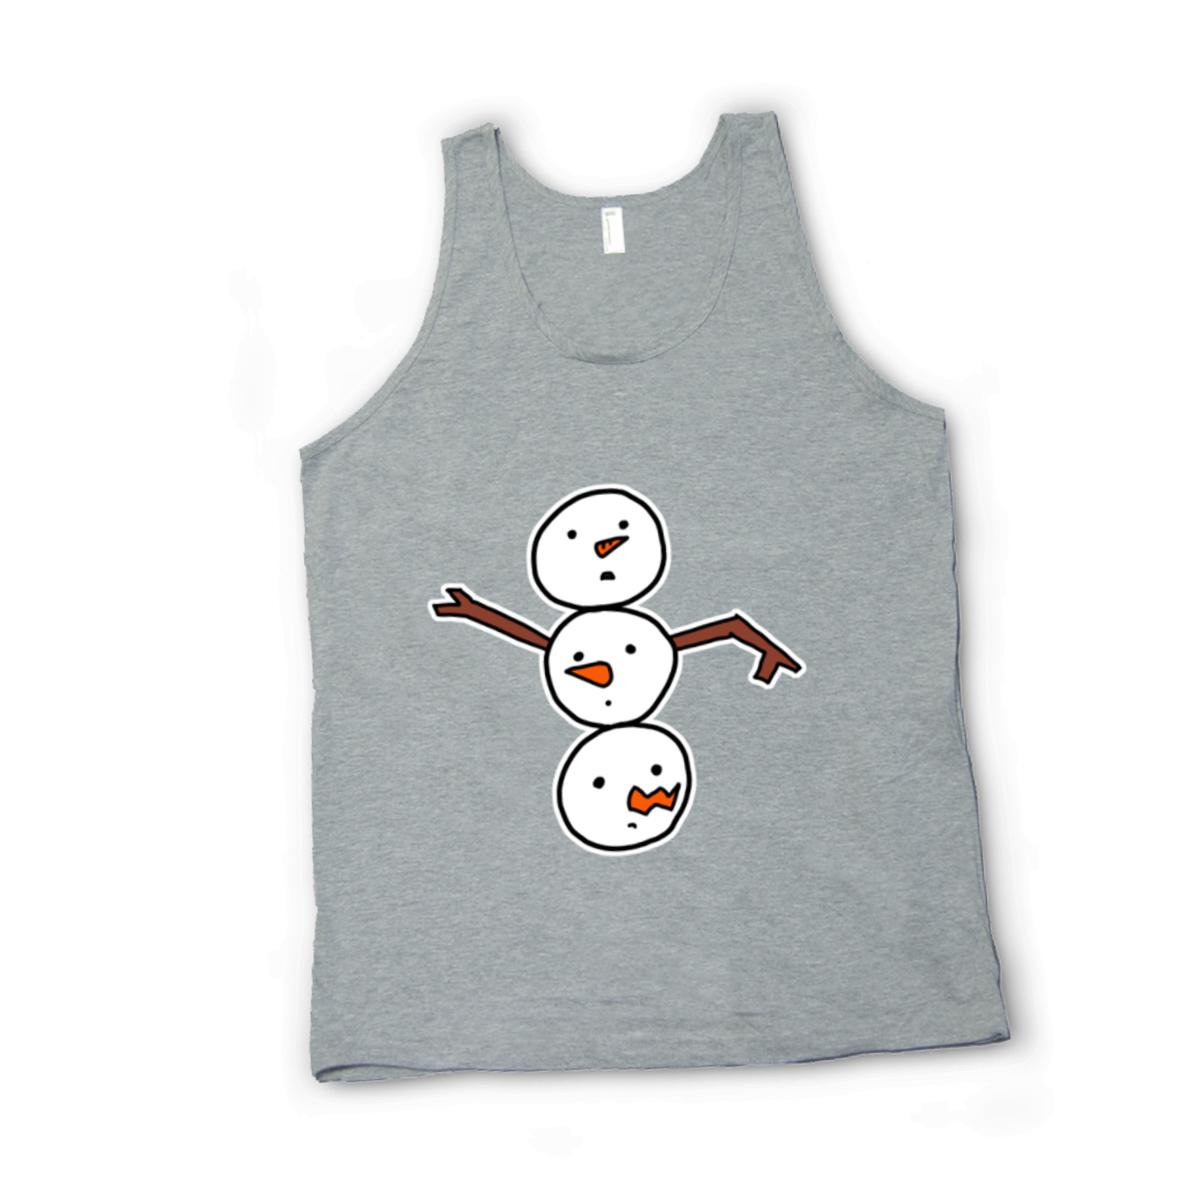 Snowman All Heads Unisex Tank Top Extra Small heather-grey